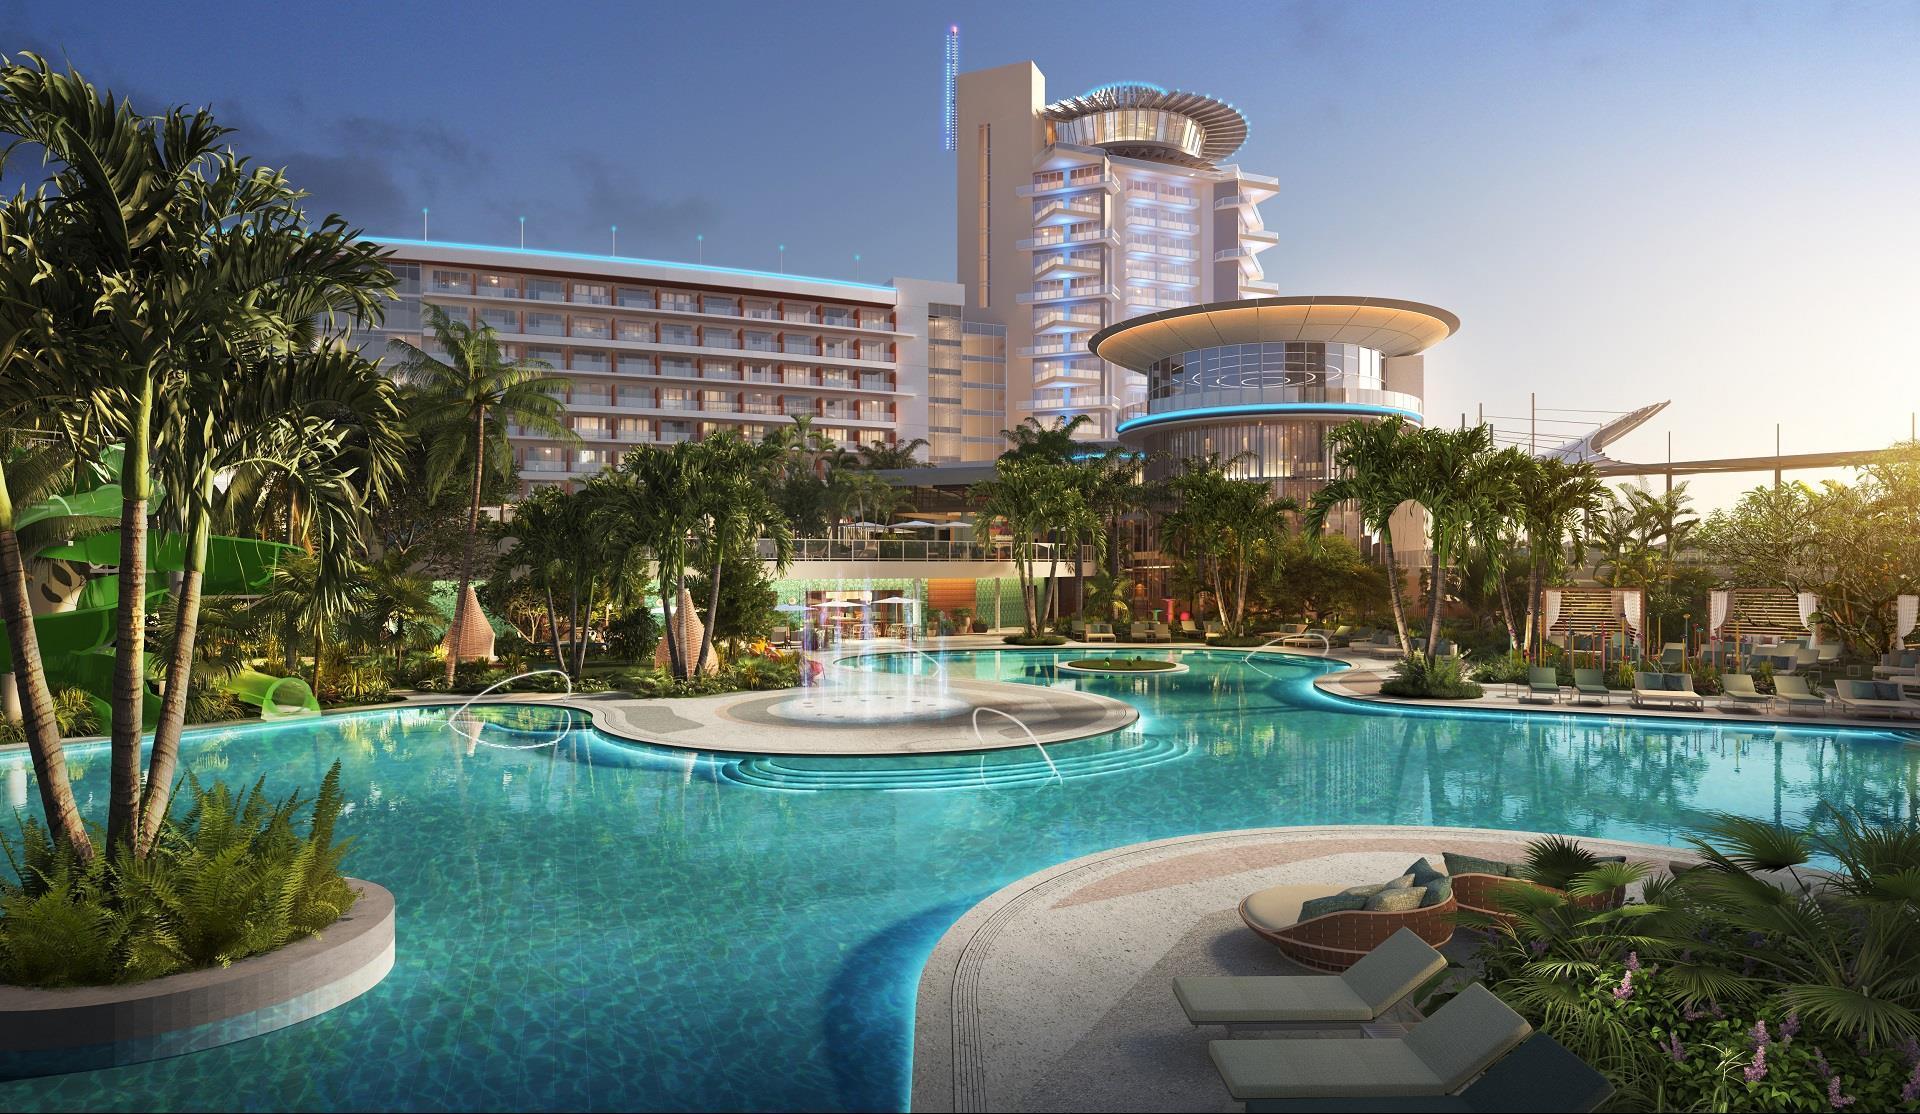 Pier Sixty-Six Resort OPENING EARLY FALL 2024 in Fort Lauderdale, FL